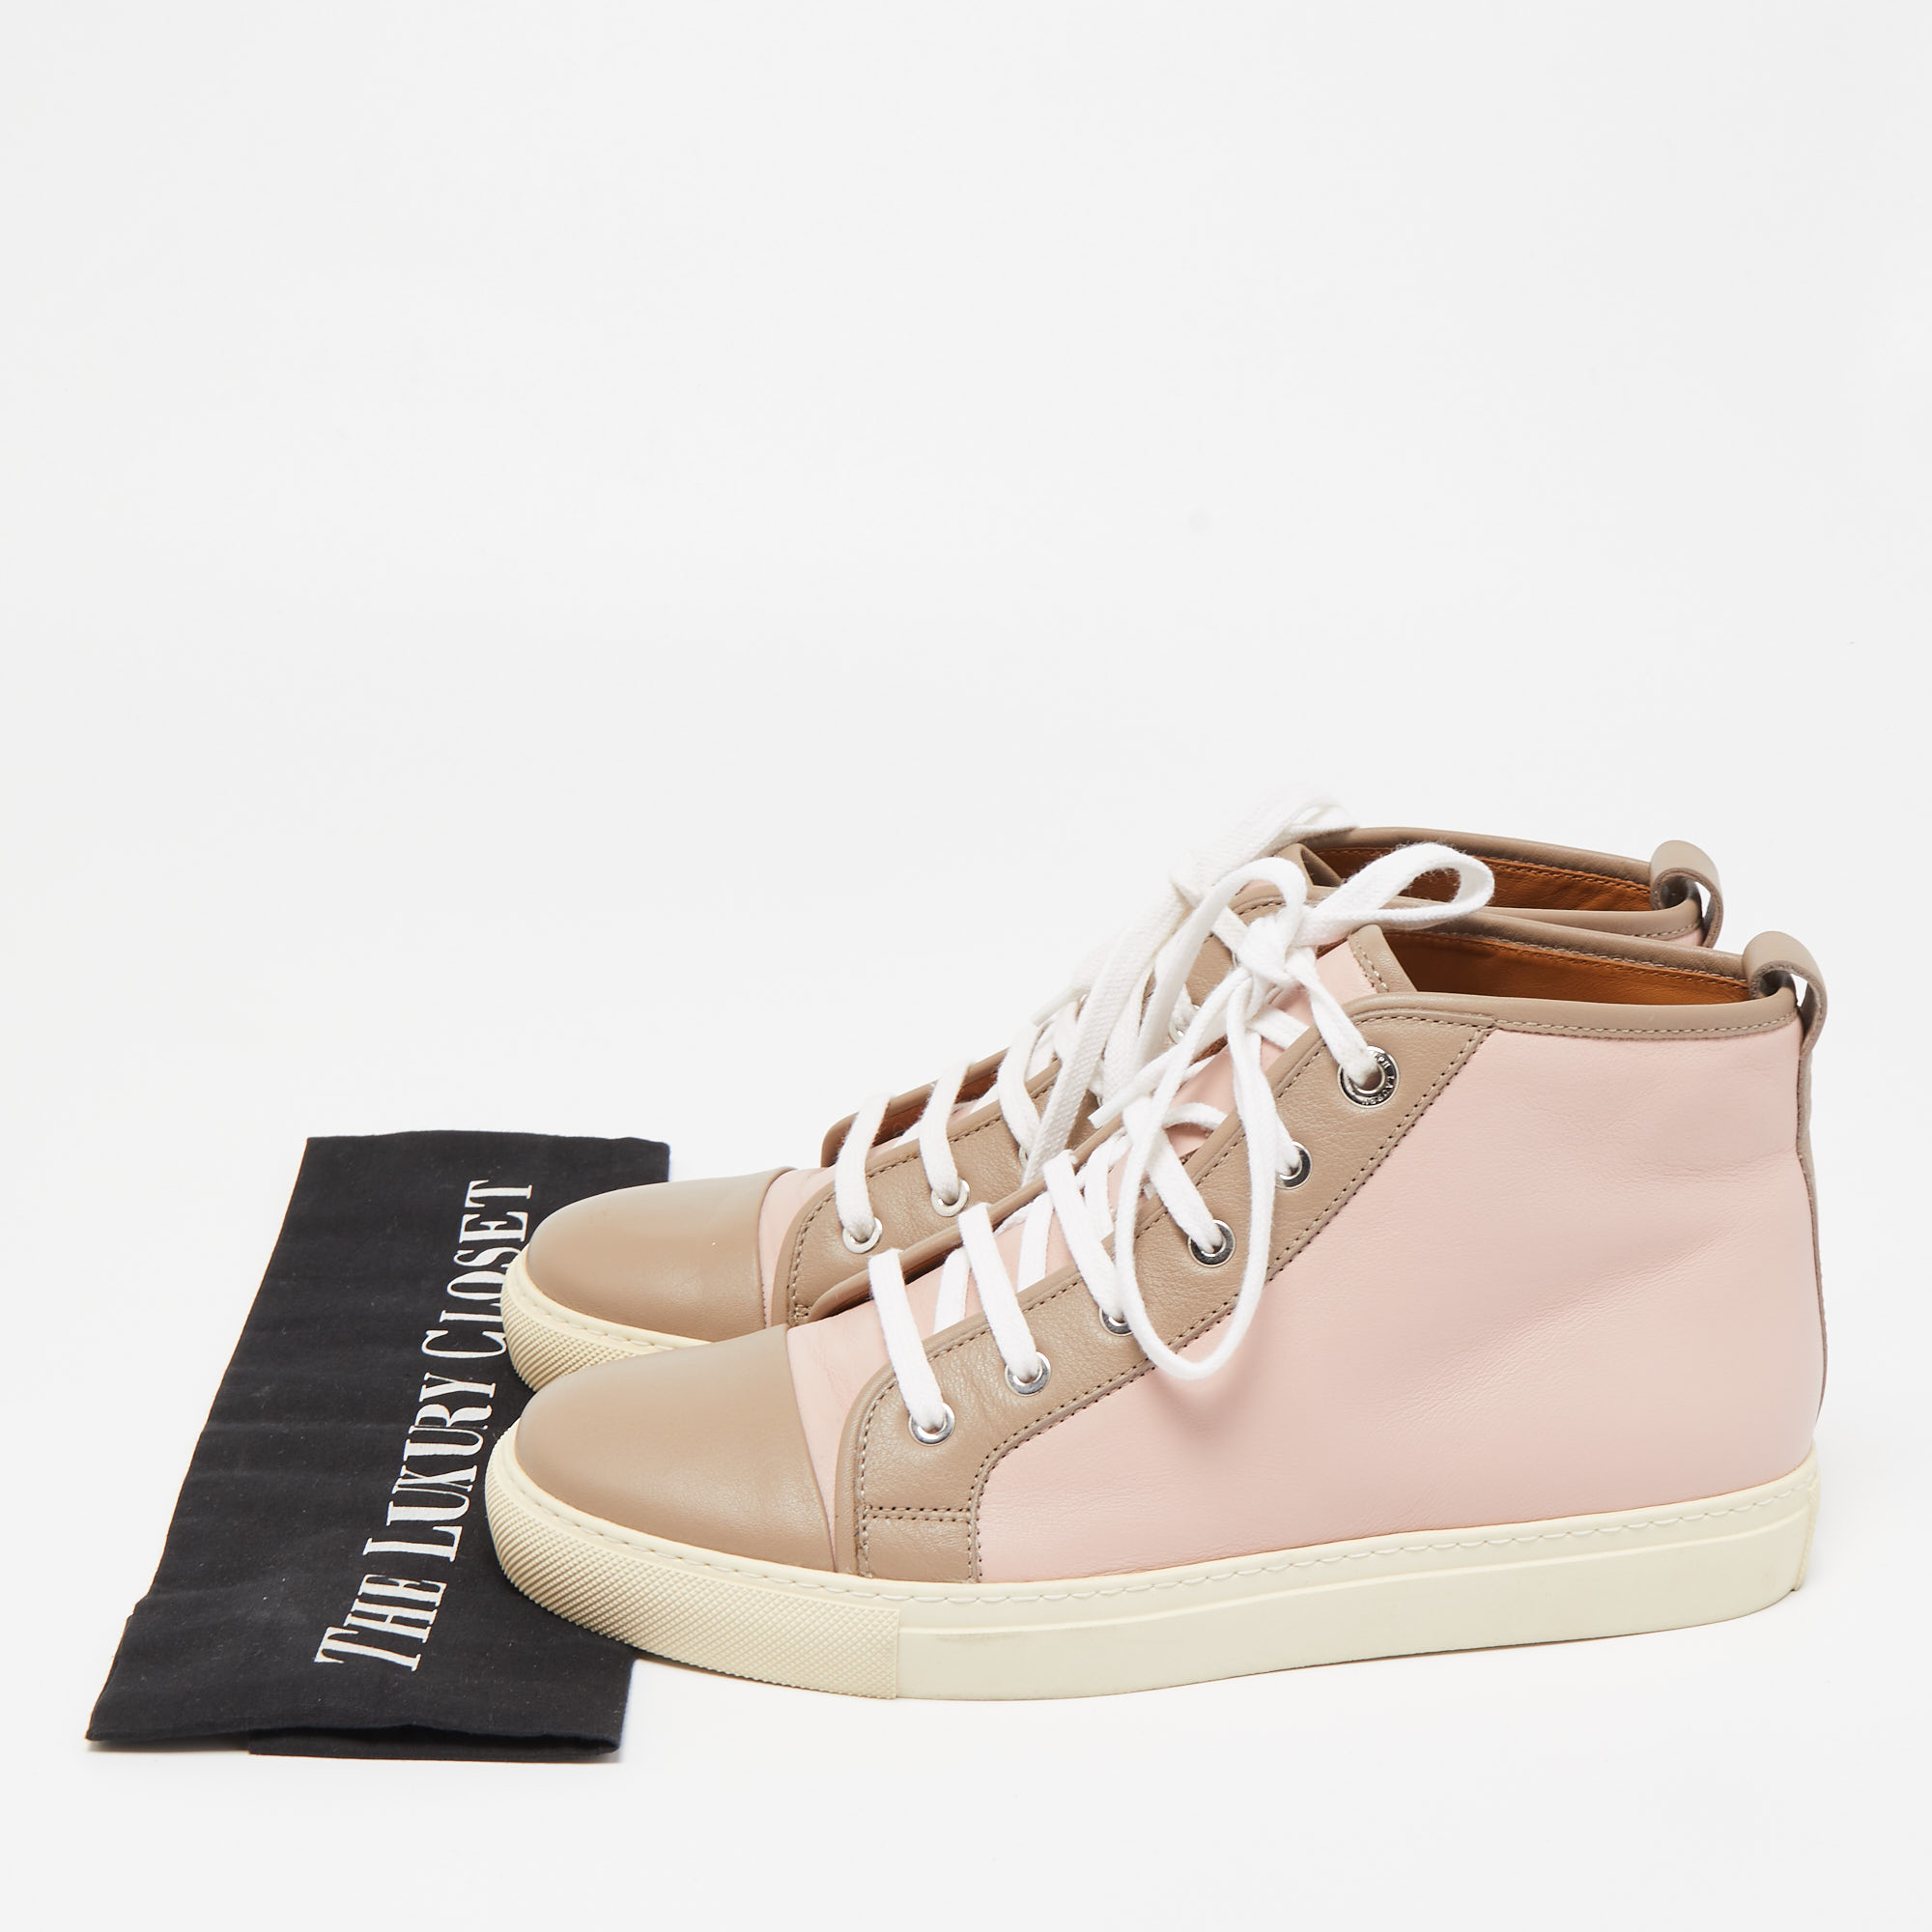 Ralph Lauren Pink/Brown Leather High Top Sneakers Size 40